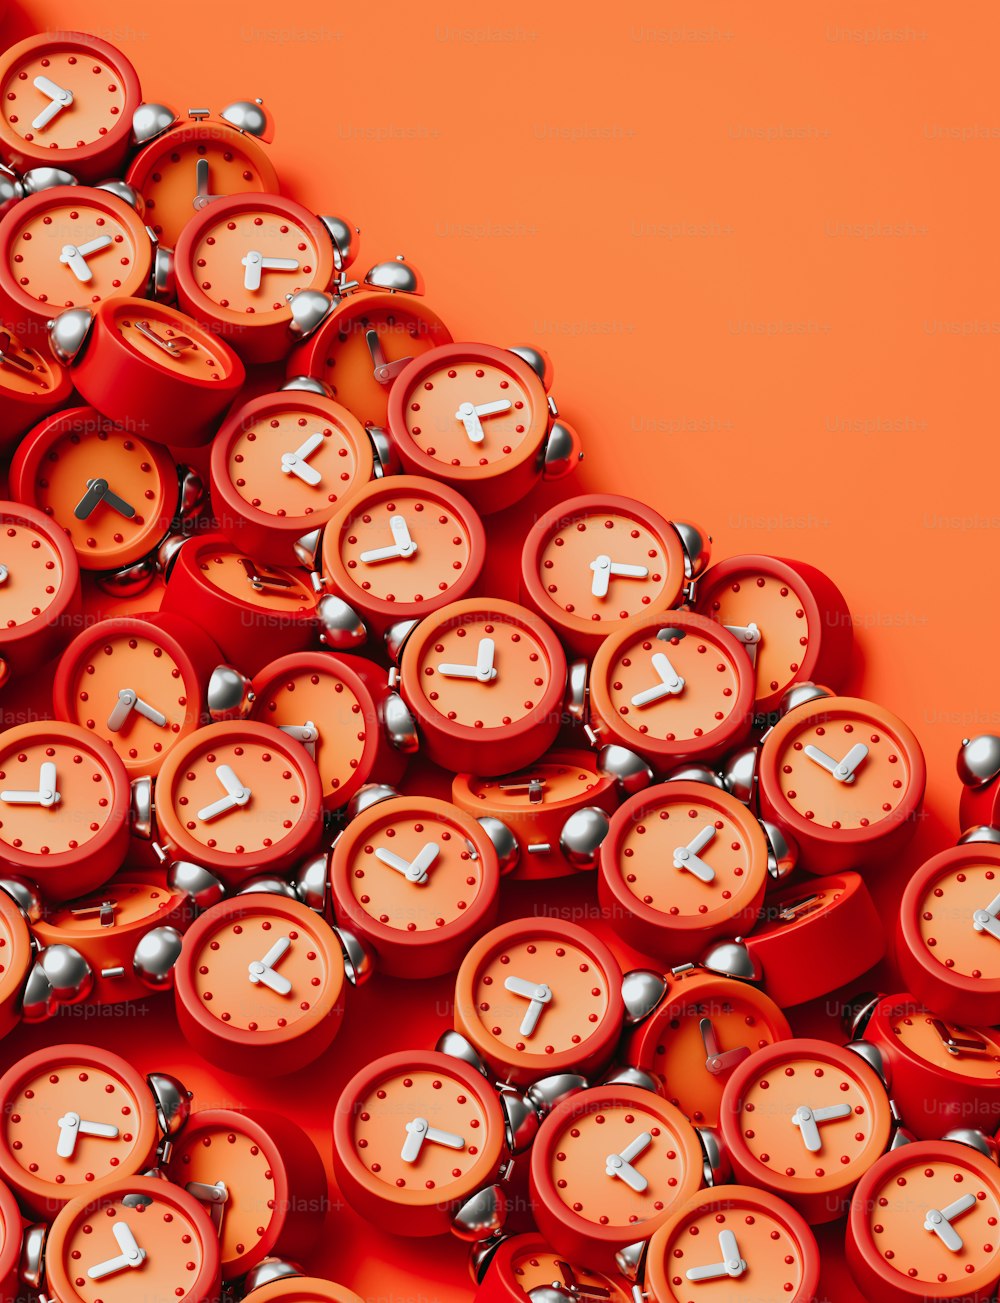 a group of red clocks sitting on top of each other